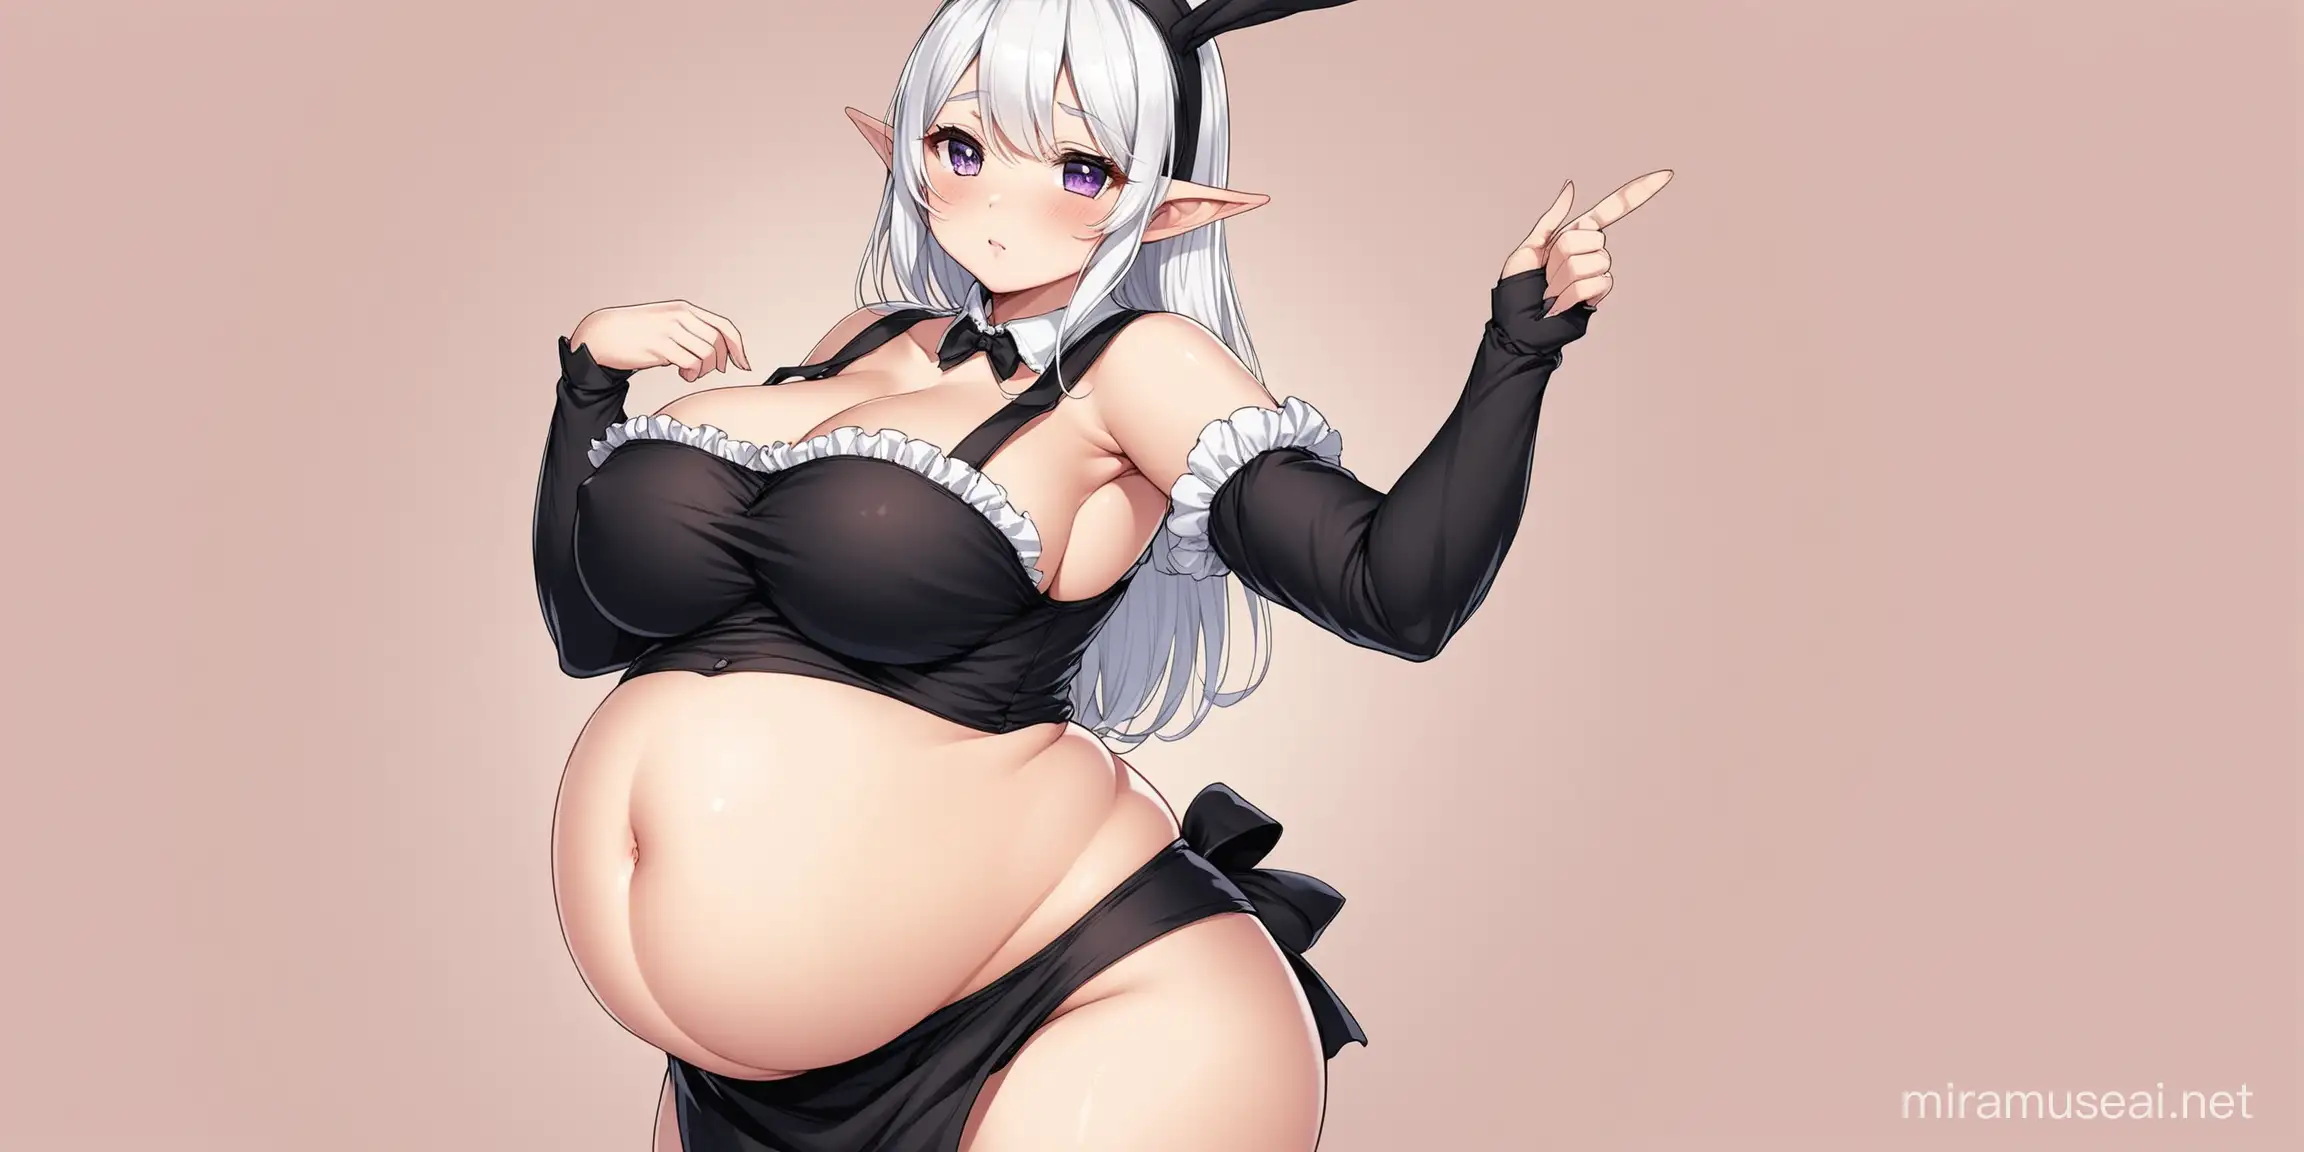 Elf Maid with Swollen Belly Awaiting Explanation